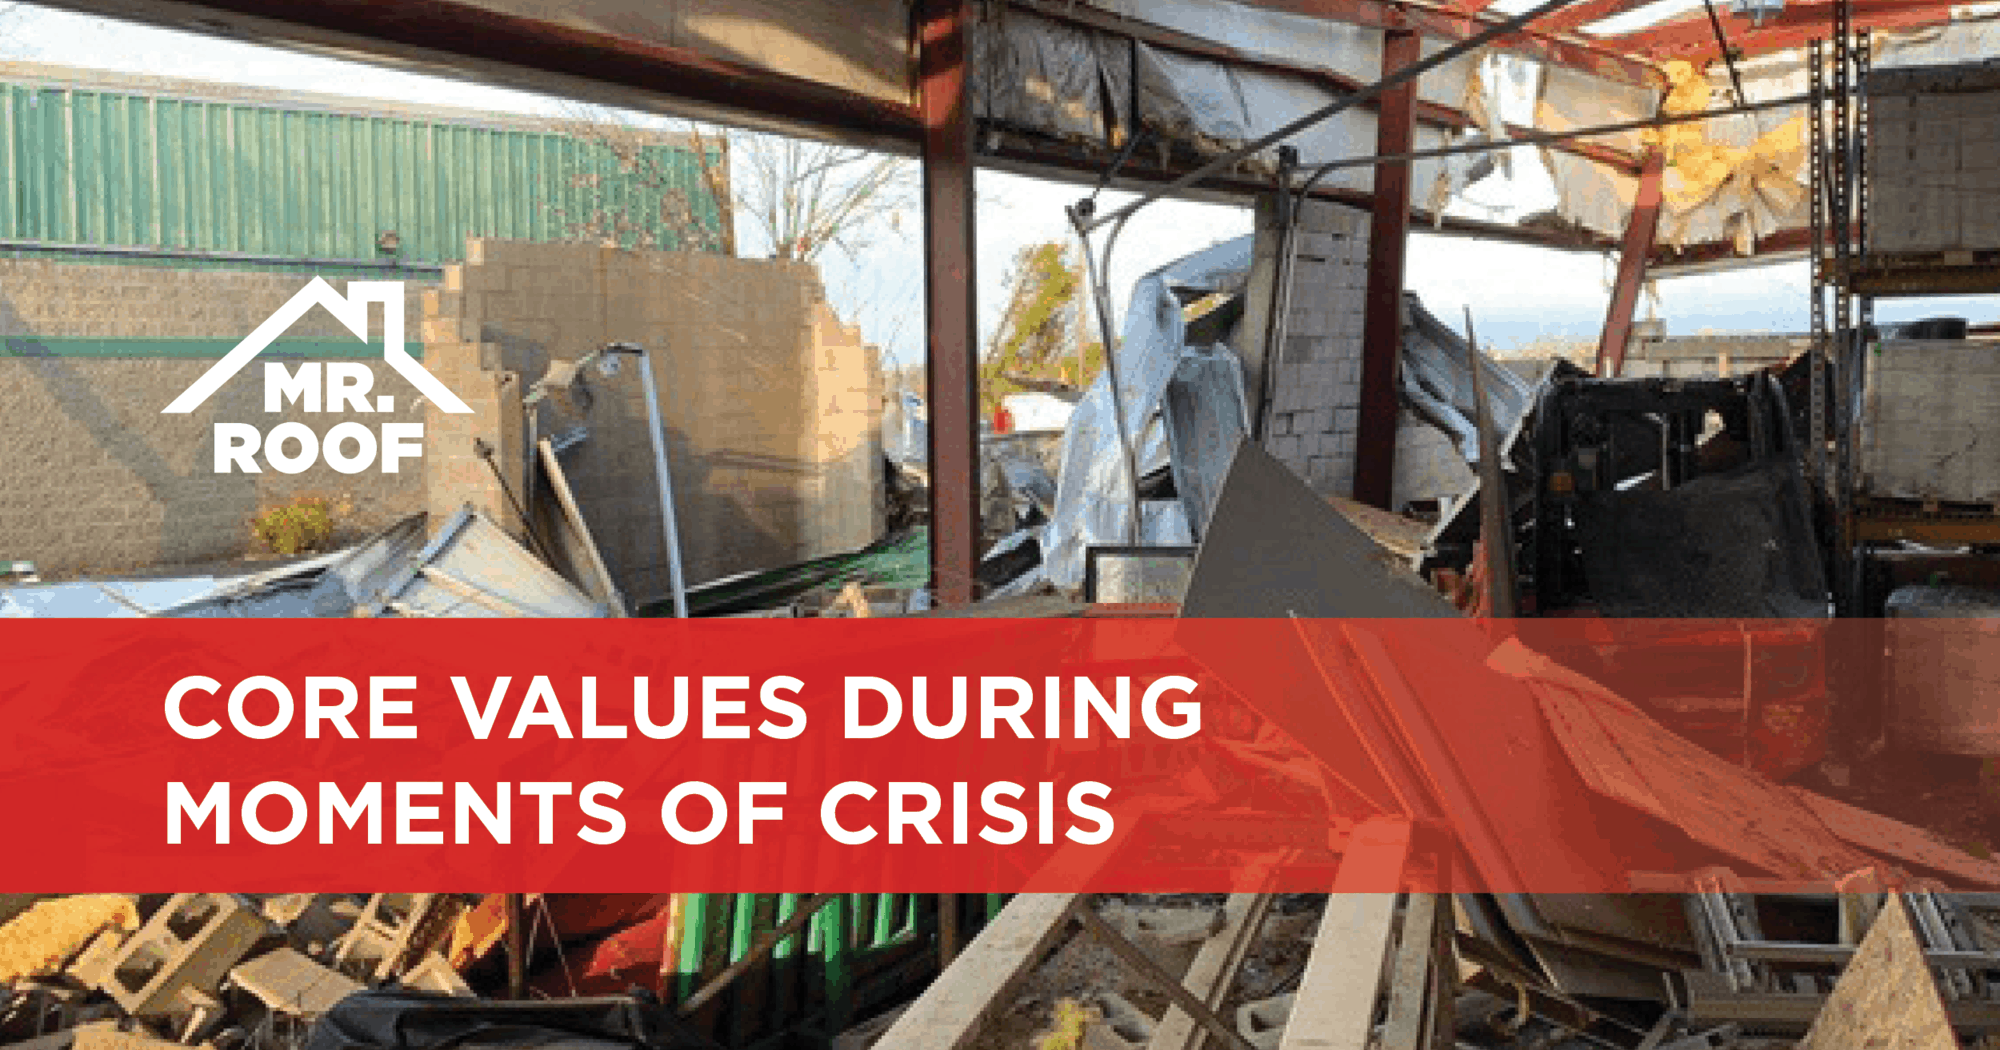 Demonstrating Core Values During Moments of Crisis